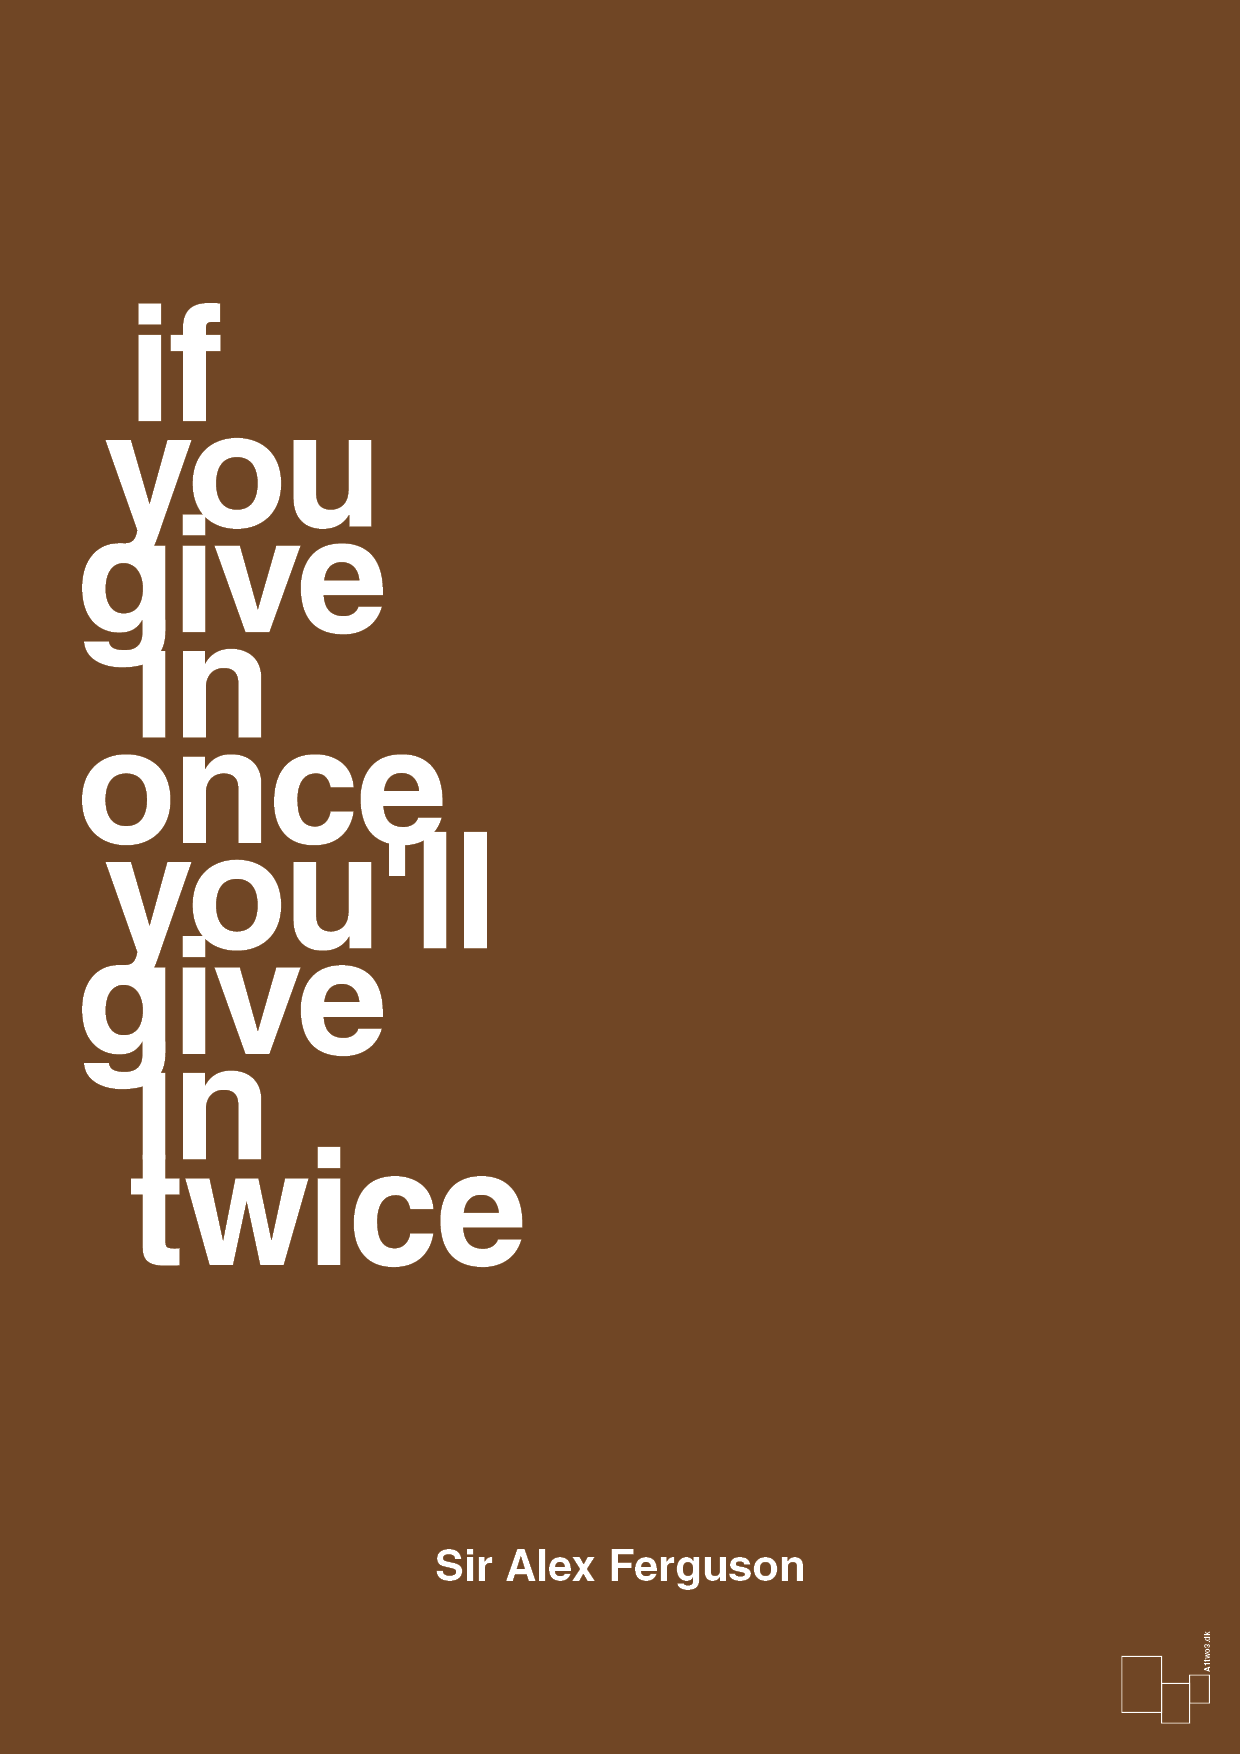 if you give in once you'll give in twice - Plakat med Citater i Dark Brown